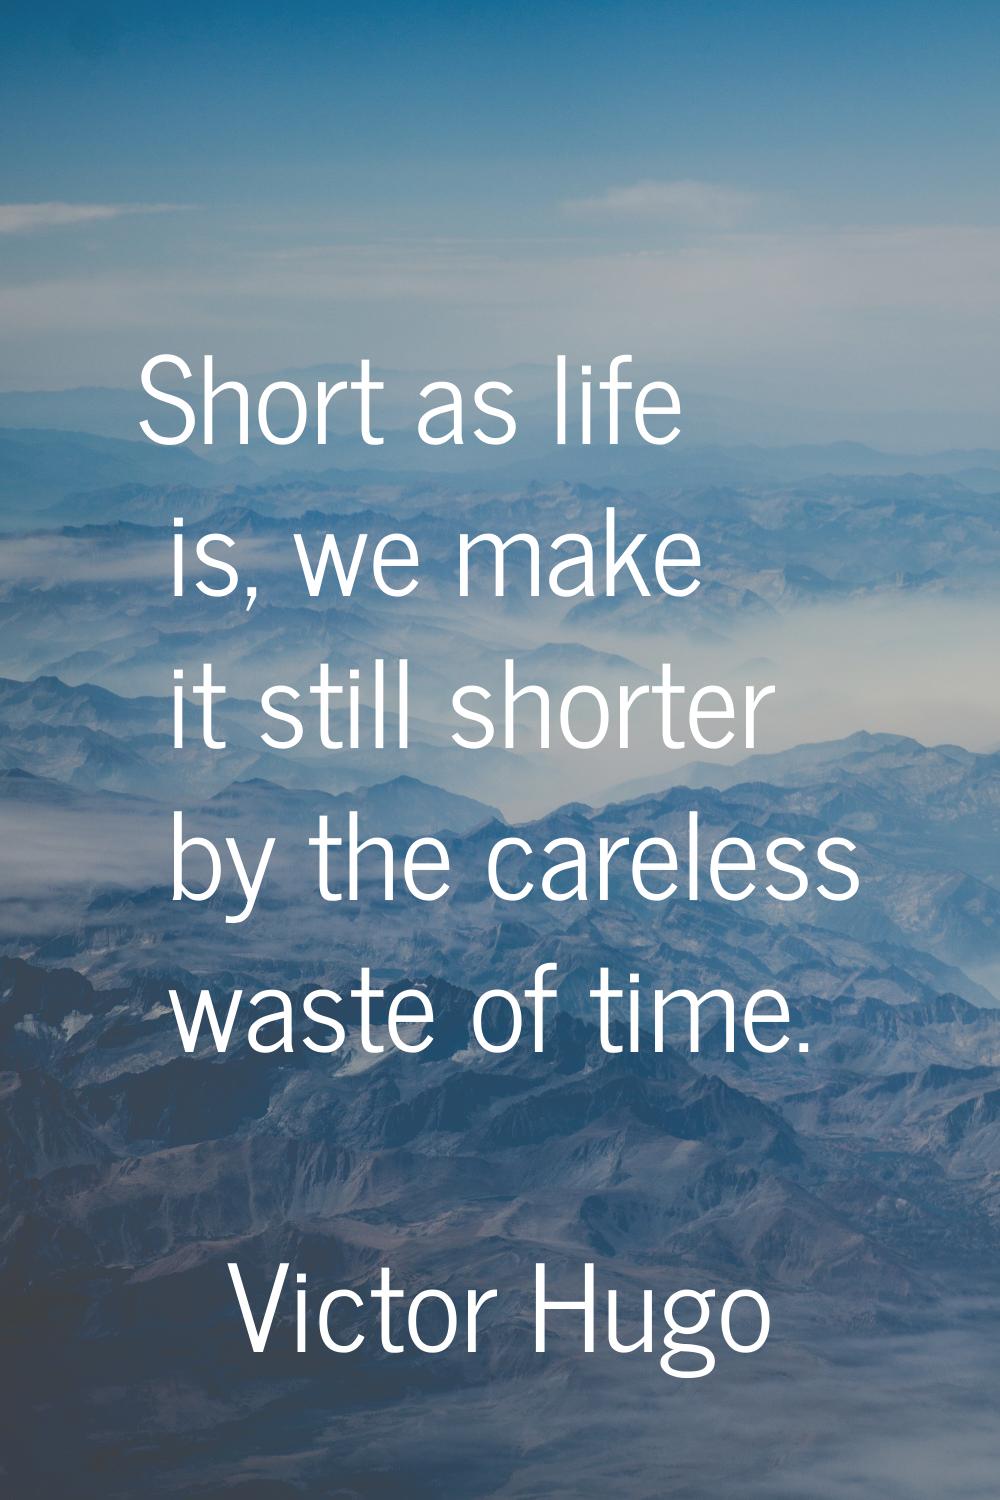 Short as life is, we make it still shorter by the careless waste of time.